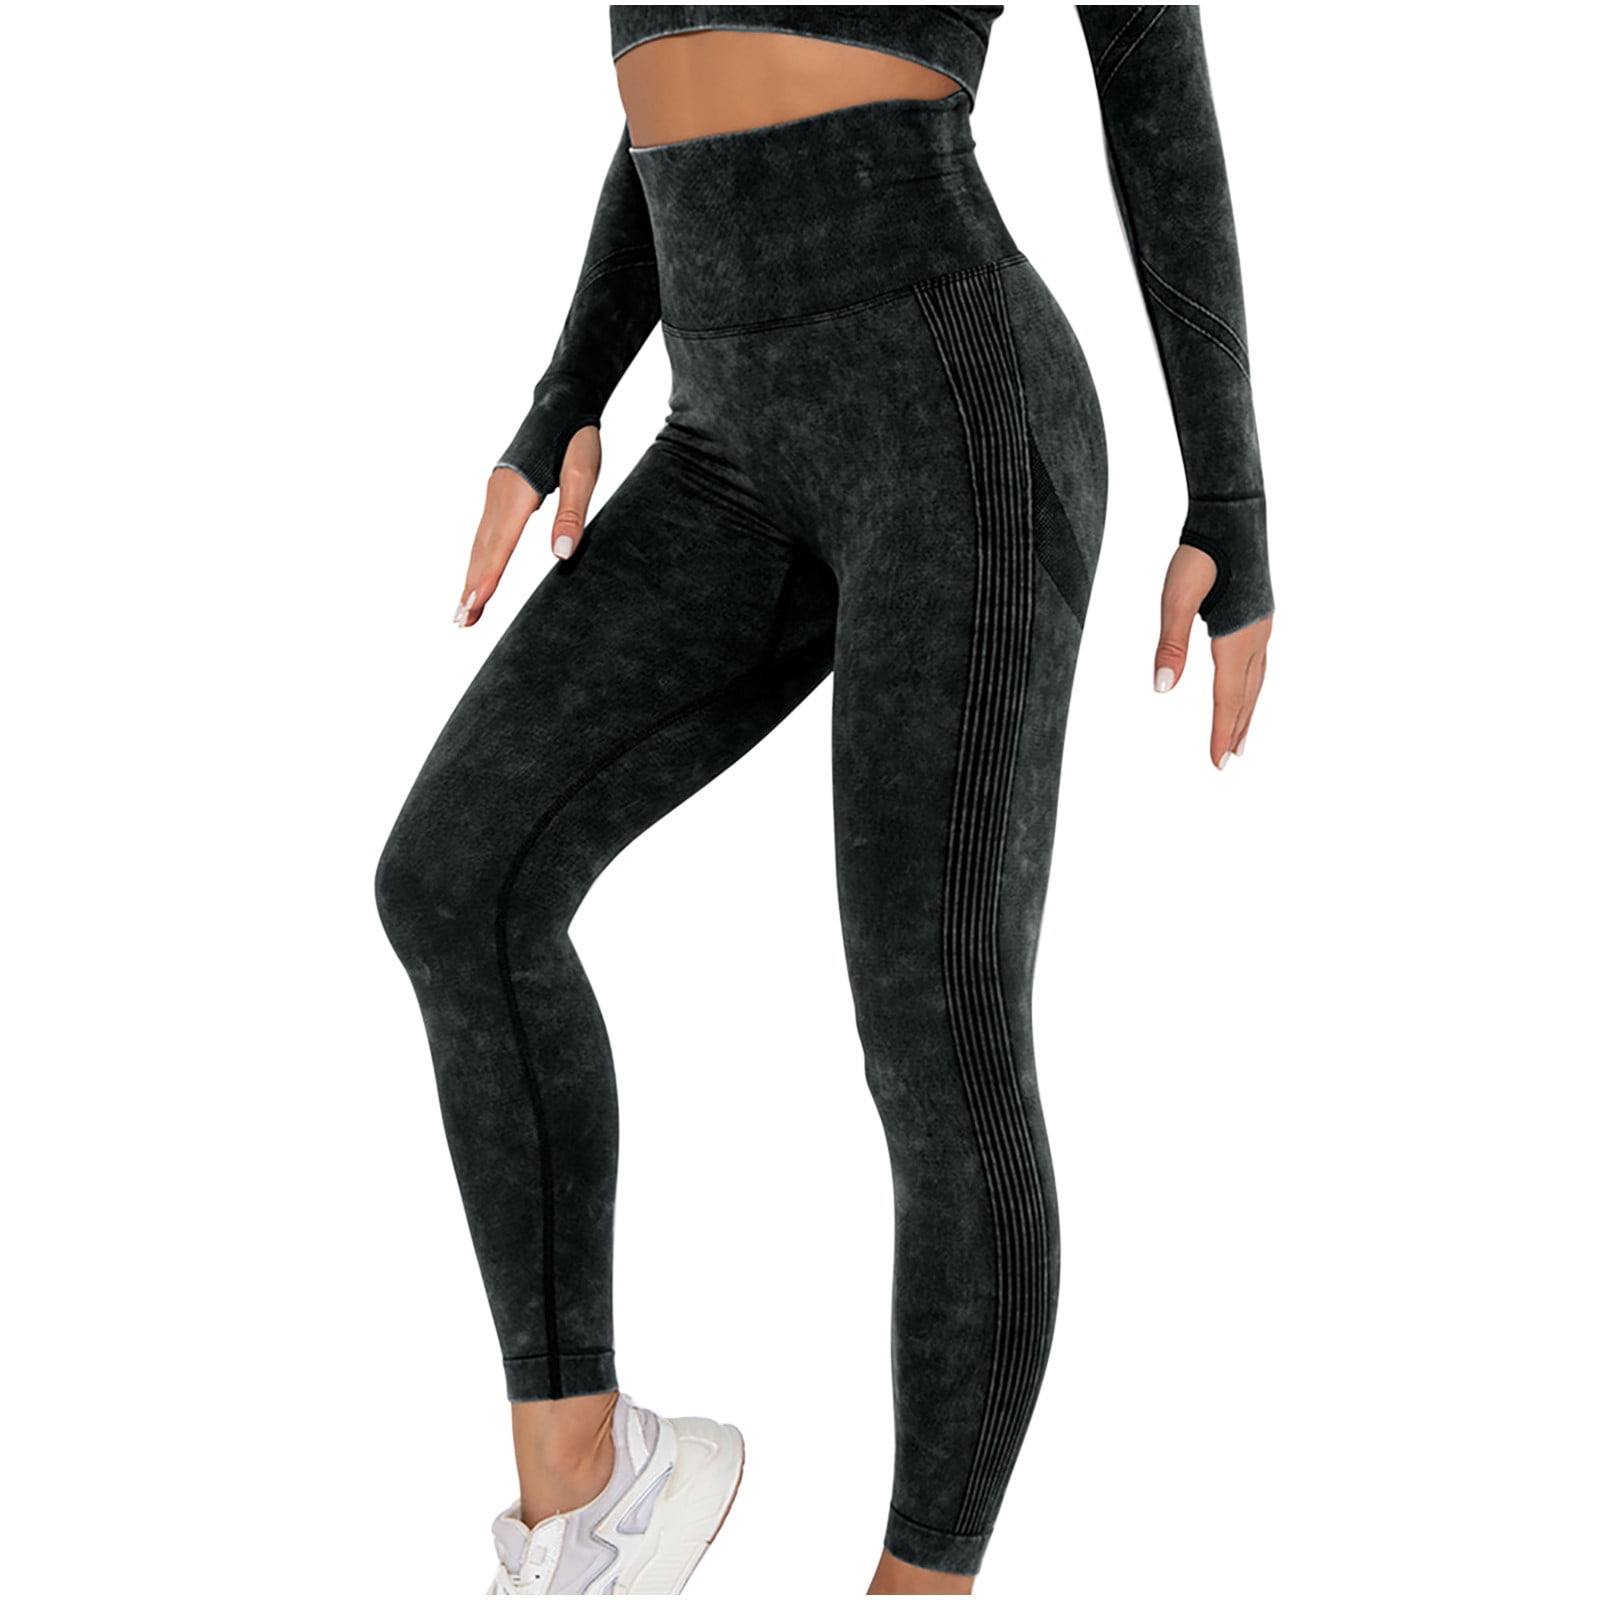  Leggings for Women Tummy Control,Women's Workout Leggings Squat  Proof High Waisted Yoga Pants 4 Way Stretch, Buttery Soft Solid Color  (Black,S) : Clothing, Shoes & Jewelry